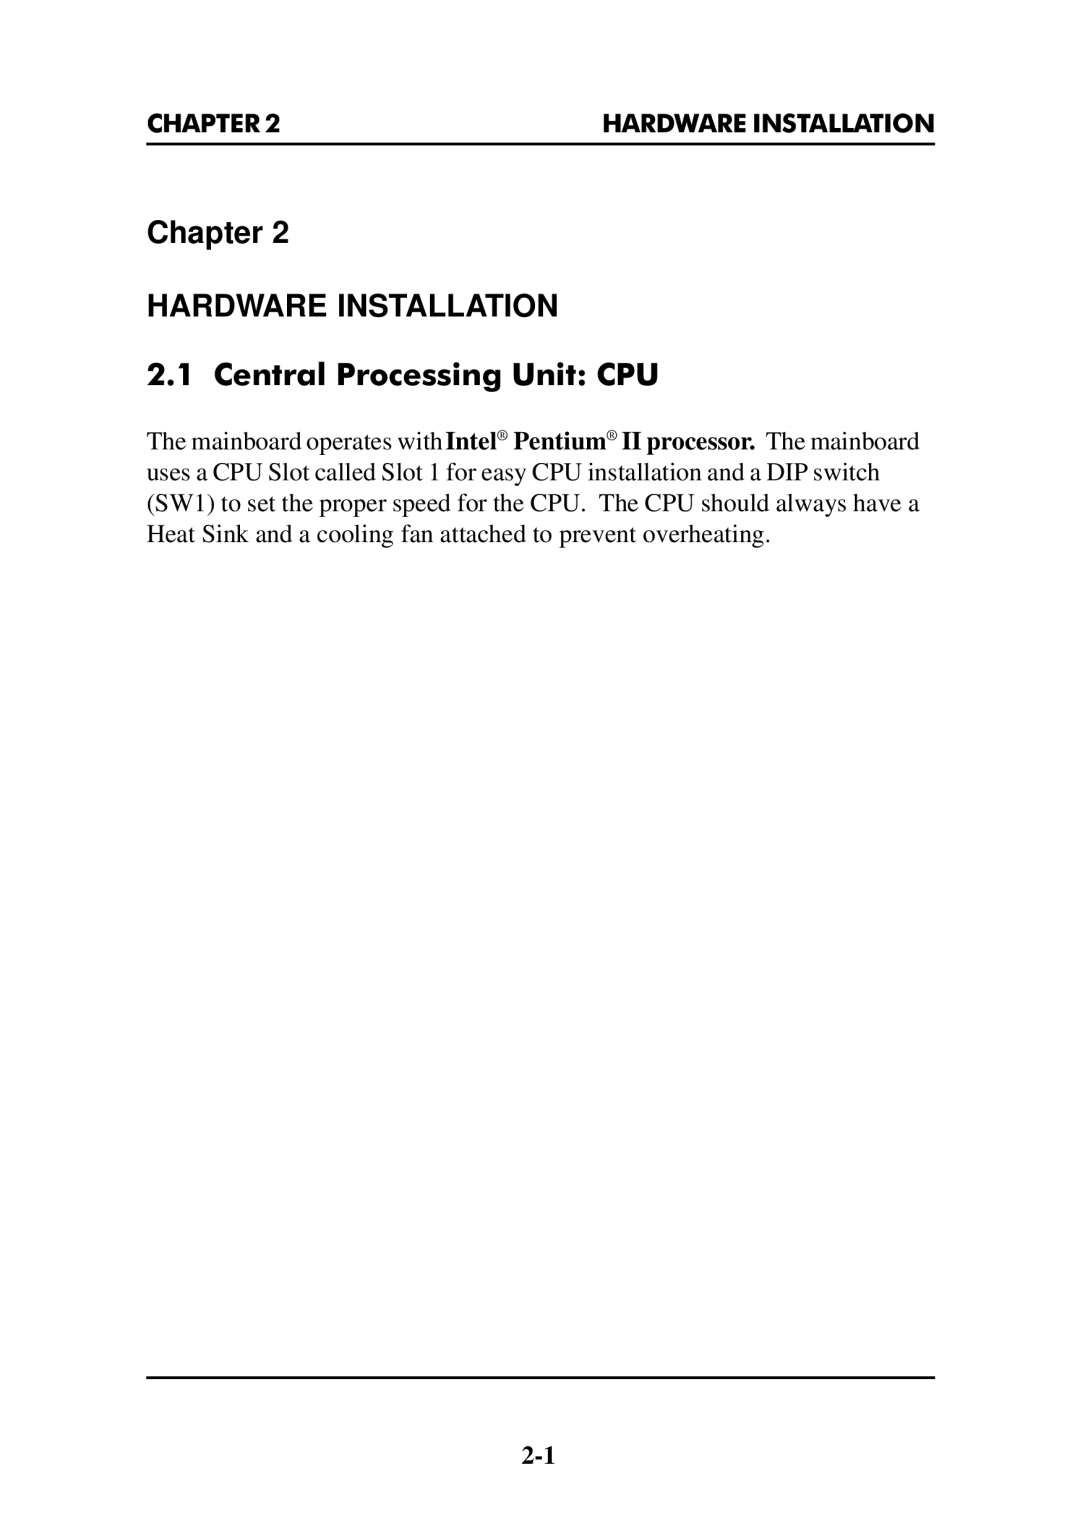 Intel MS-6112 manual Chapter HARDWARE INSTALLATION, Central Processing Unit CPU 